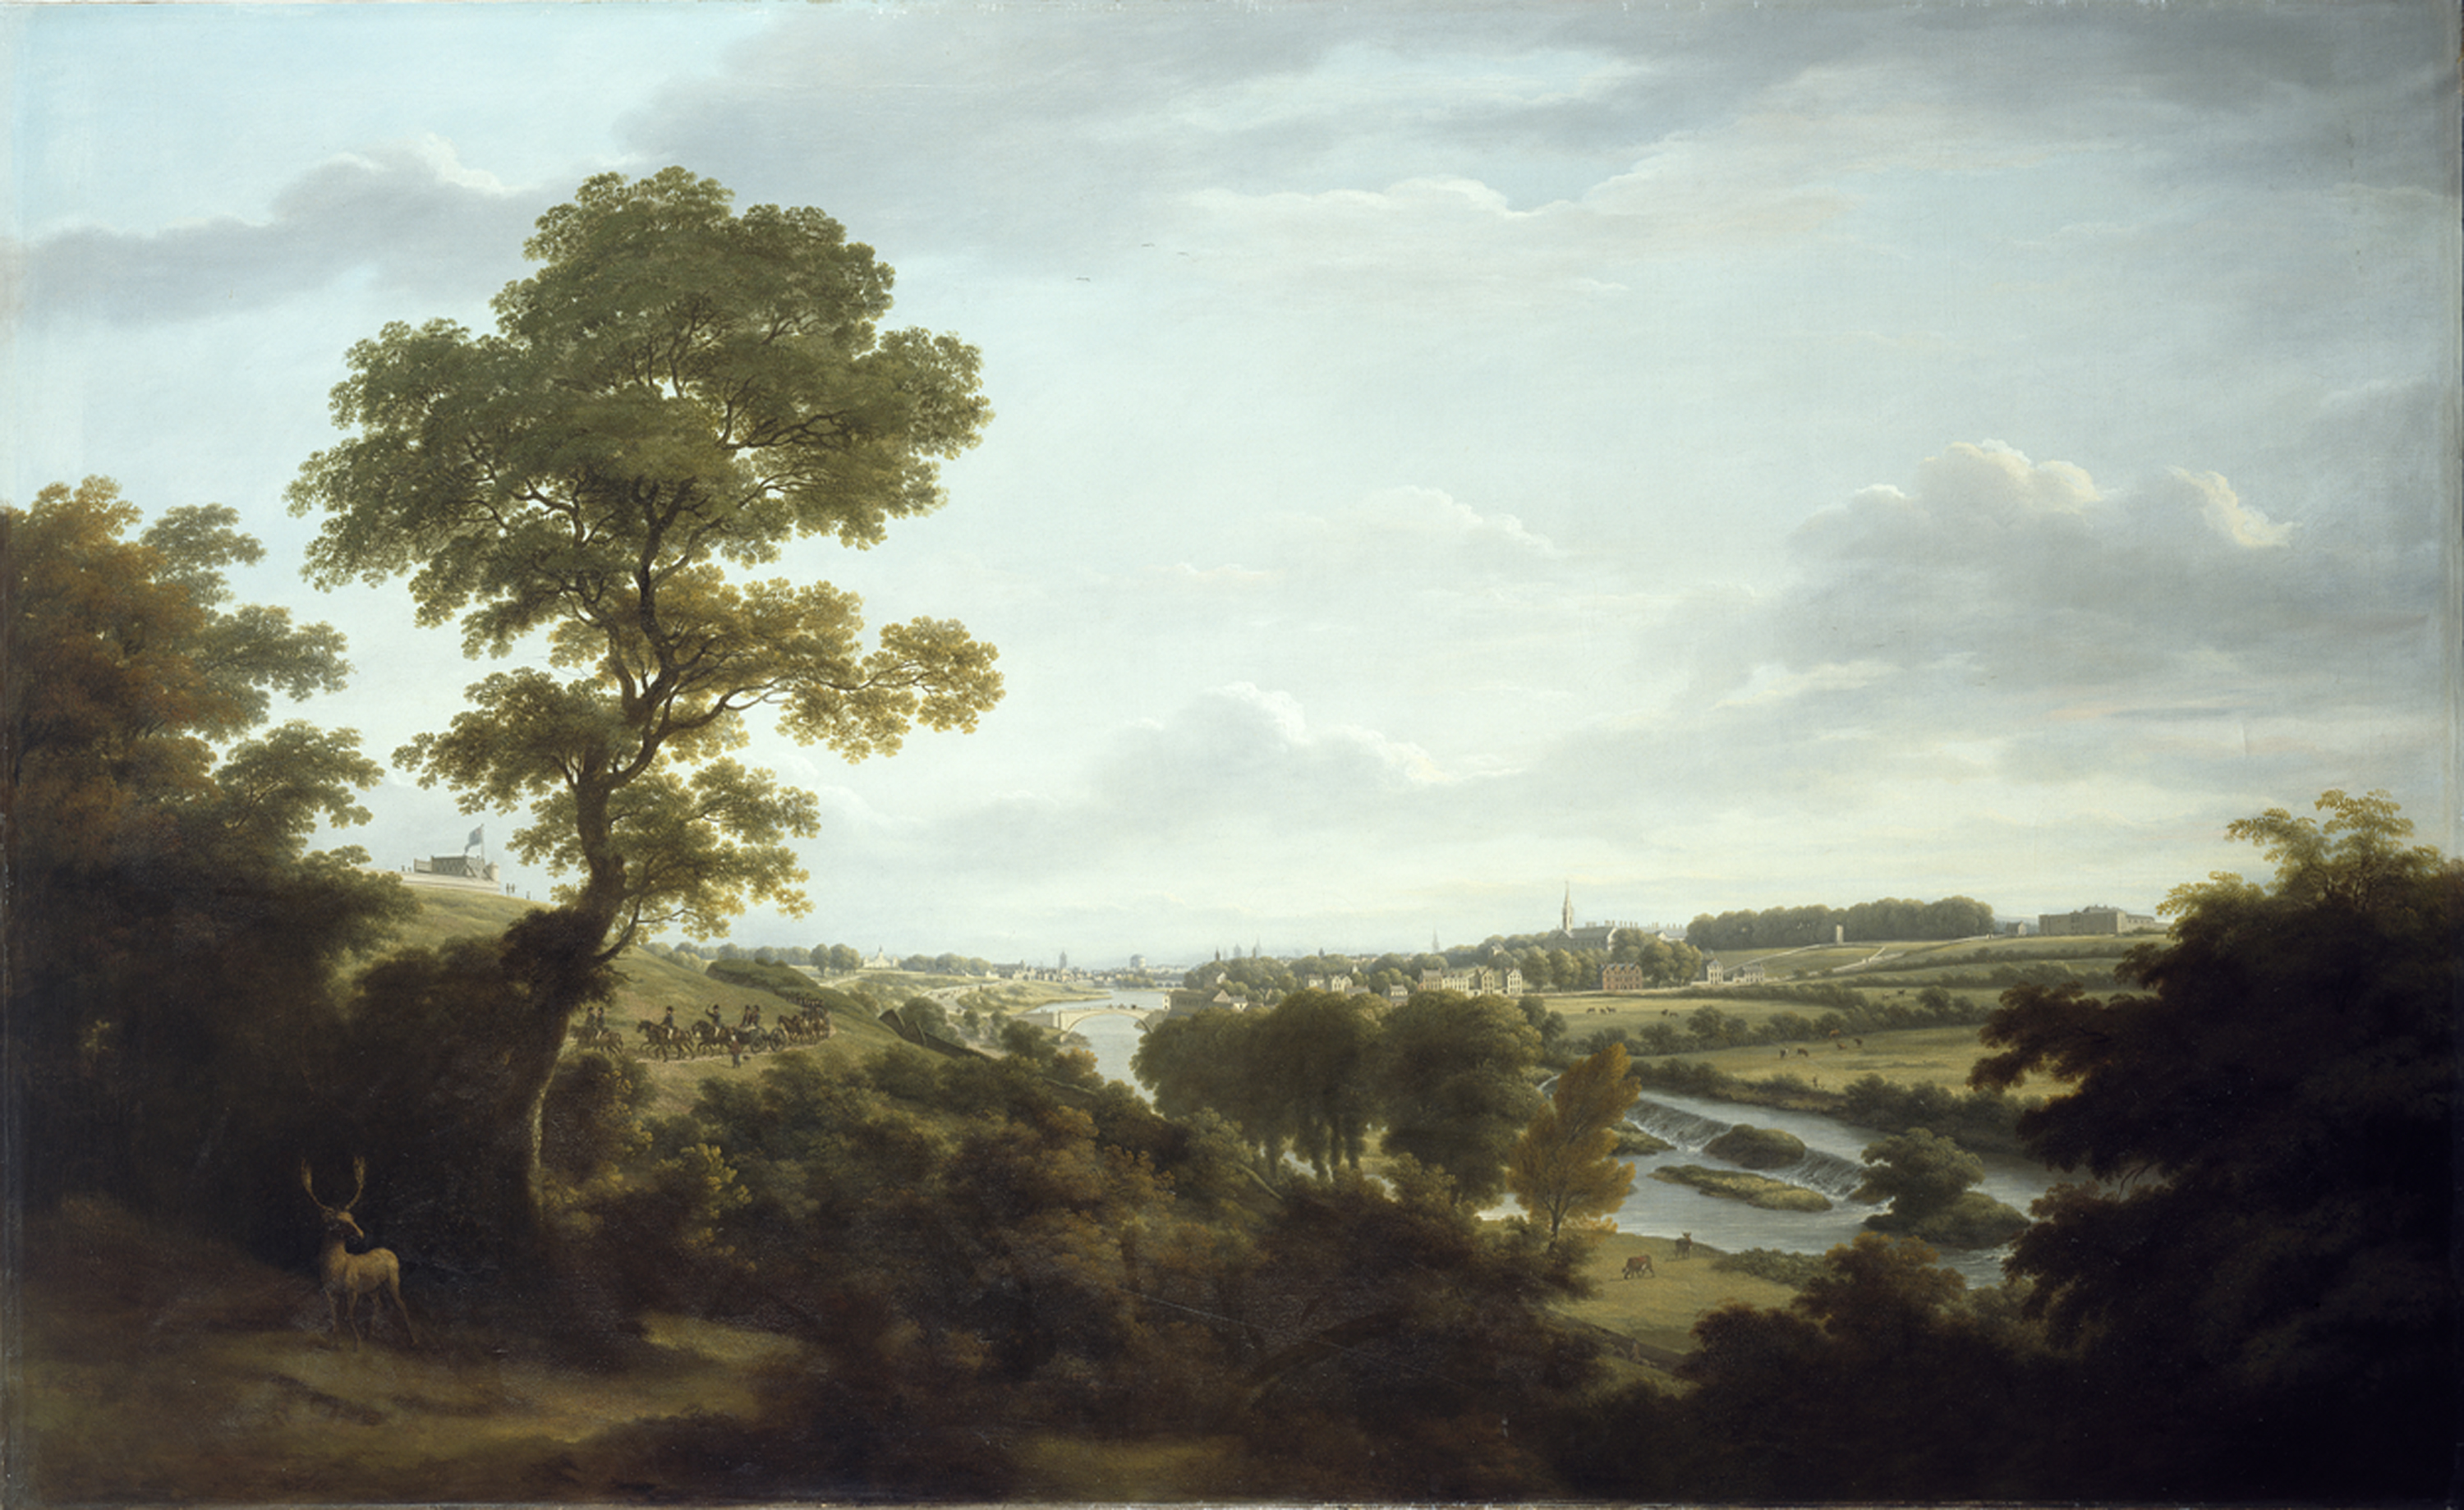 A View of Dublin from Chapelizod by William Ashford - 1795-98 National Gallery of Ireland